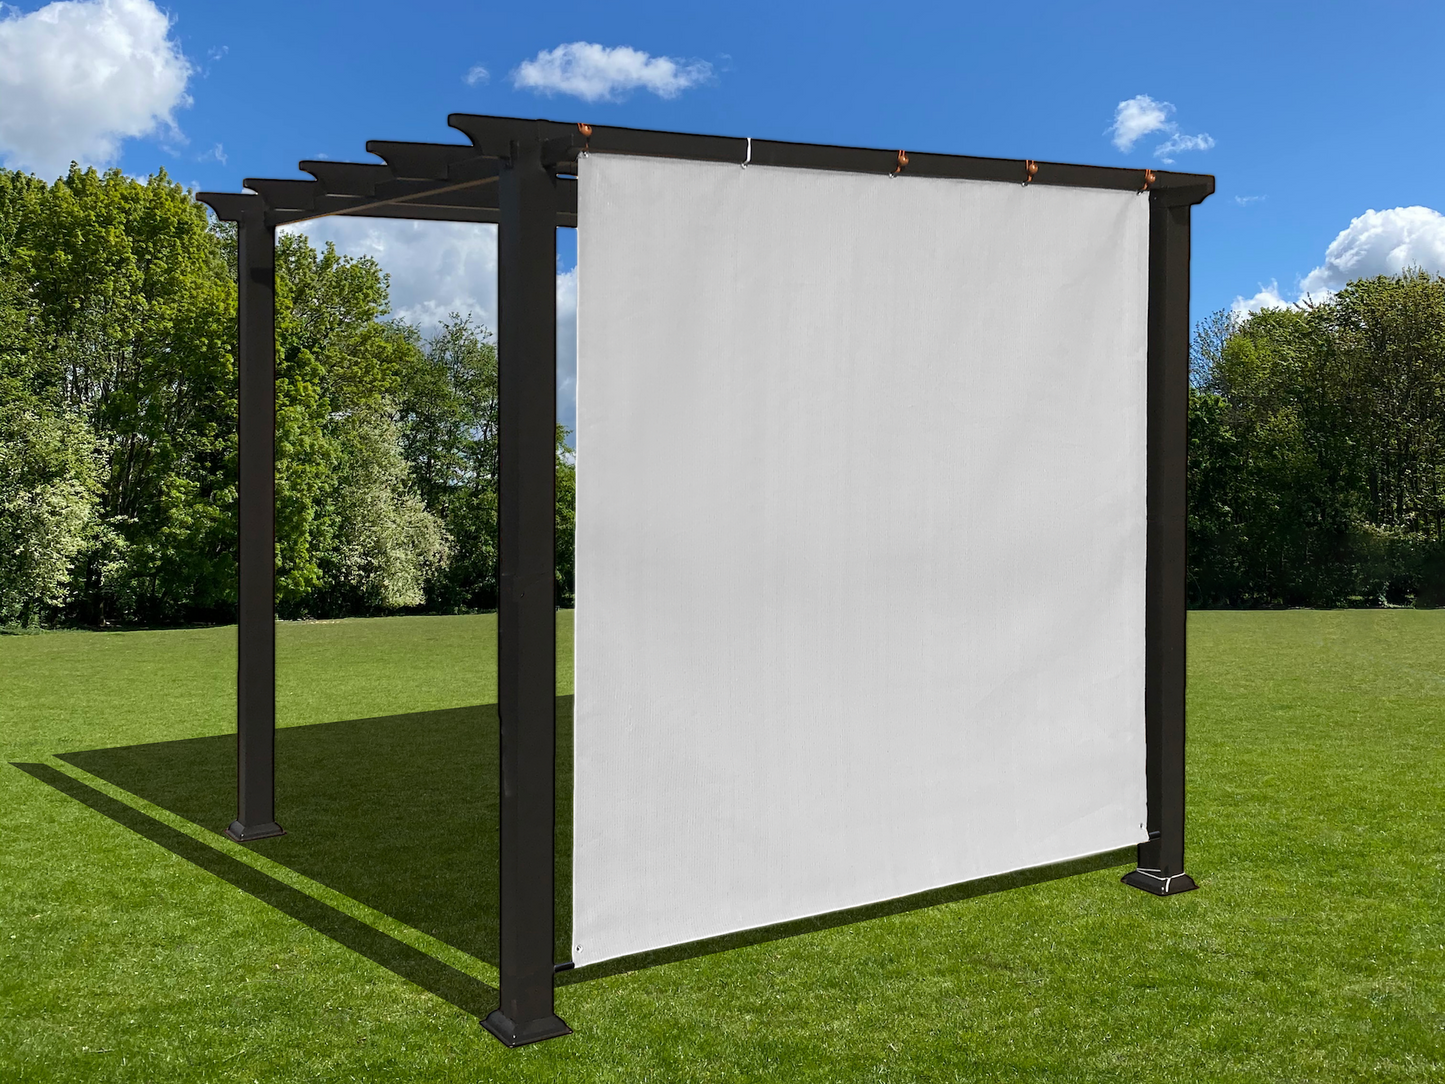 HDPE Sun Shade Cover Panel with 1-Side Grommets & 1-Side Rod Pocket – Smoke Tan